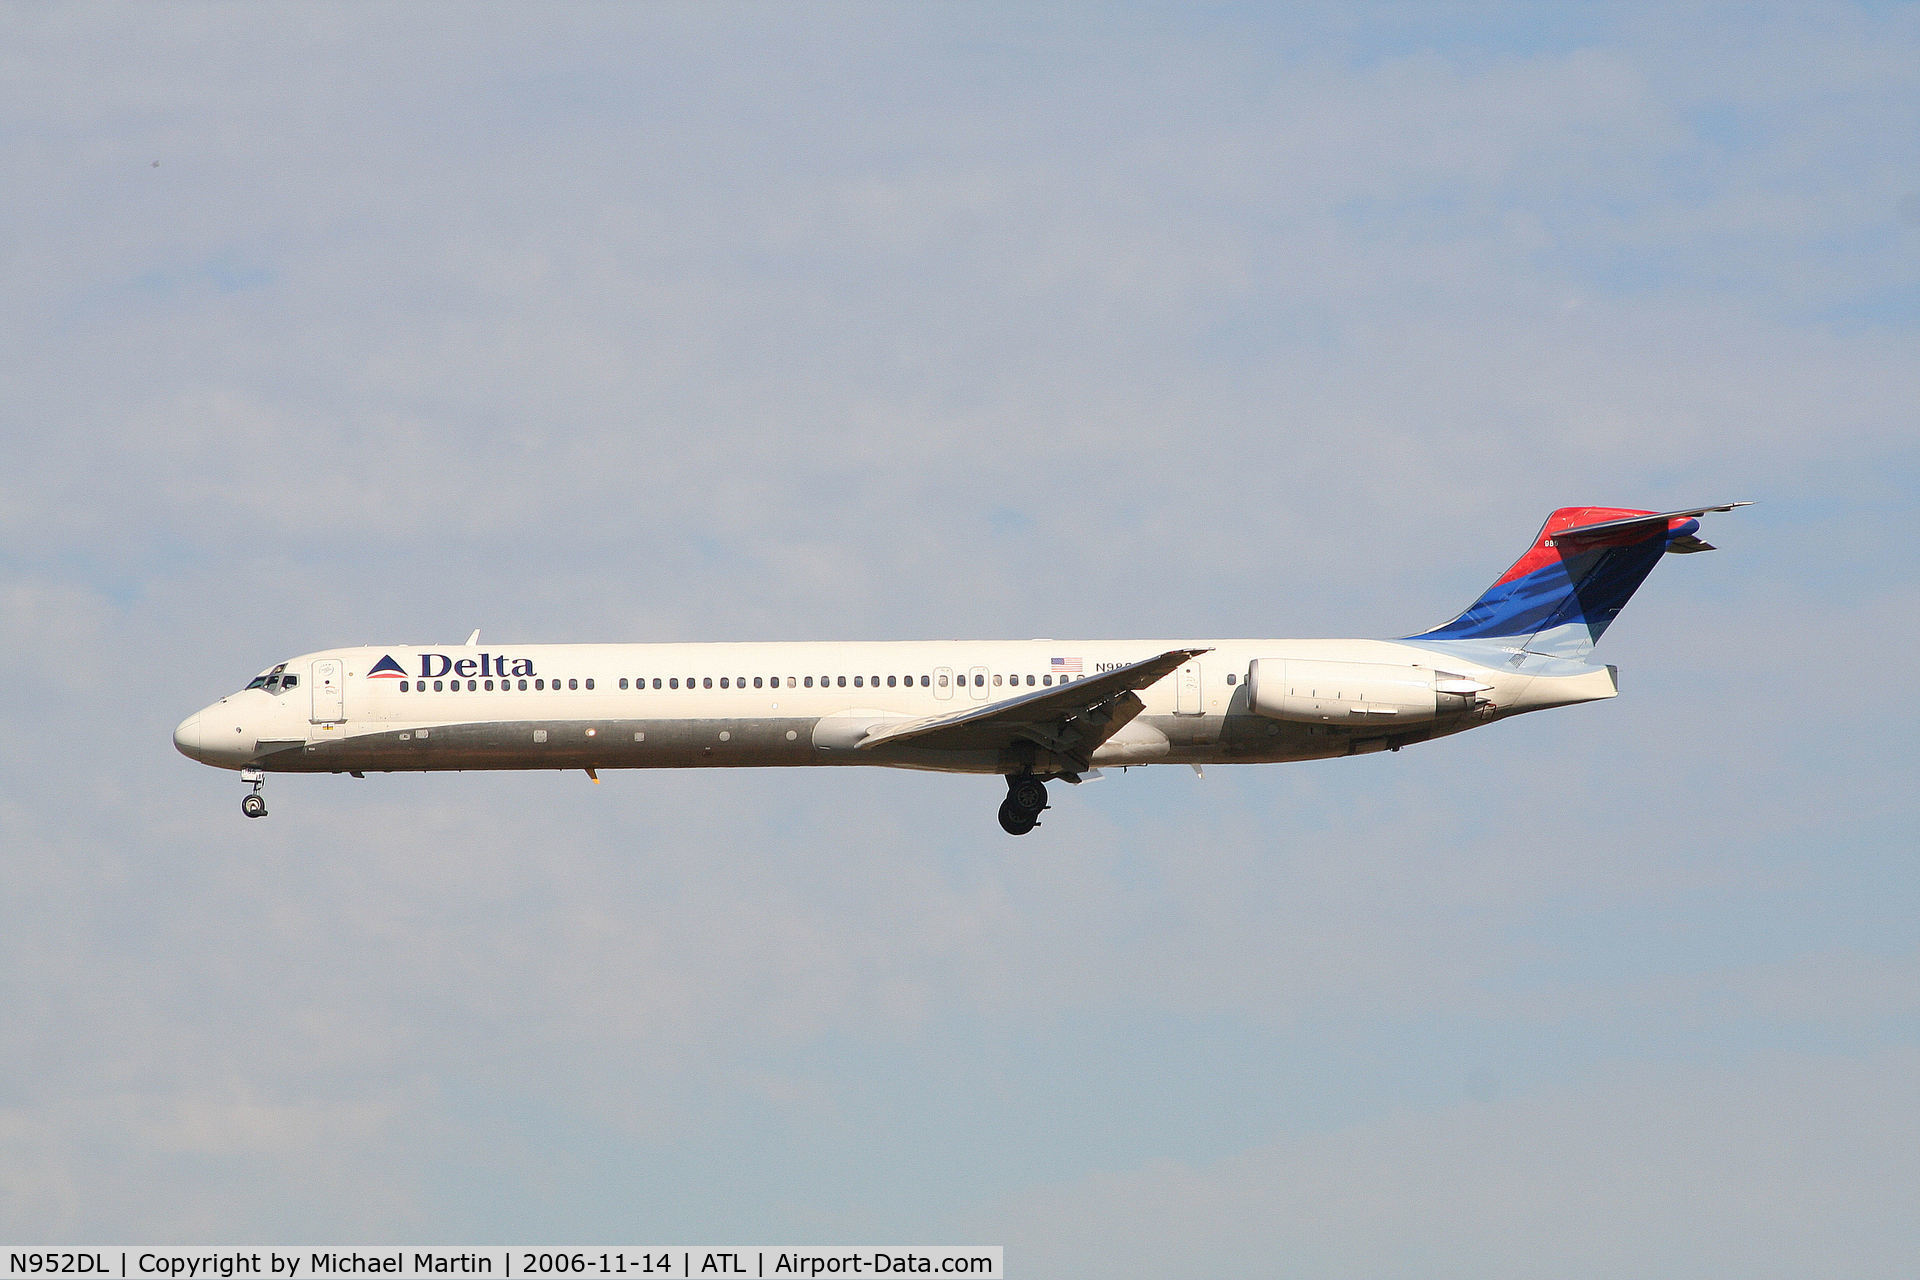 N952DL, 1990 McDonnell Douglas MD-88 C/N 49883, Over the numbers of 27L